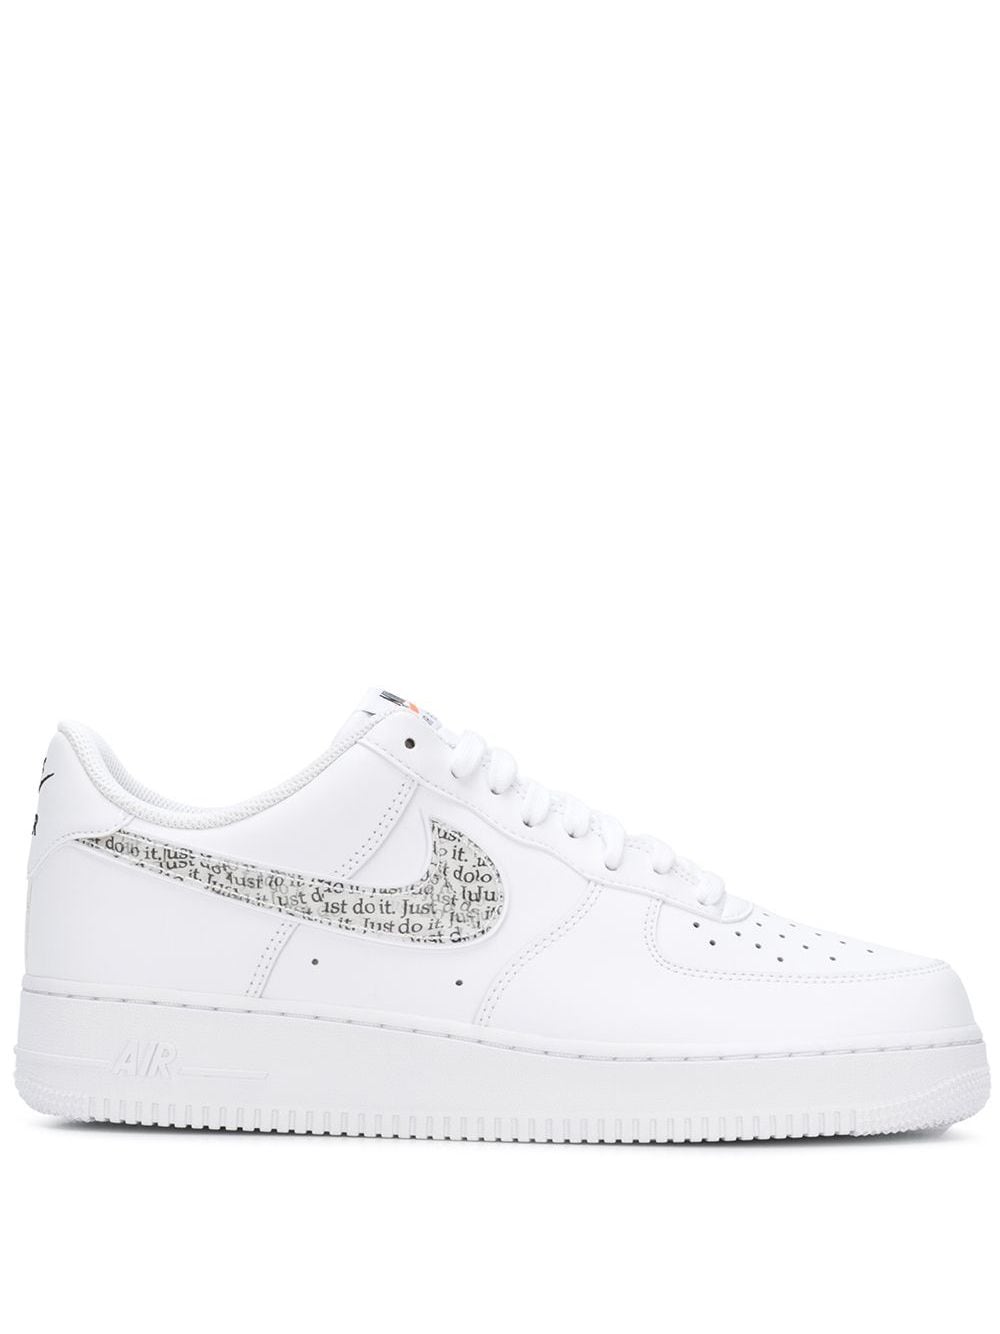 White Nike Air Force 1 '07 Sneakers For Men | Farfetch.com